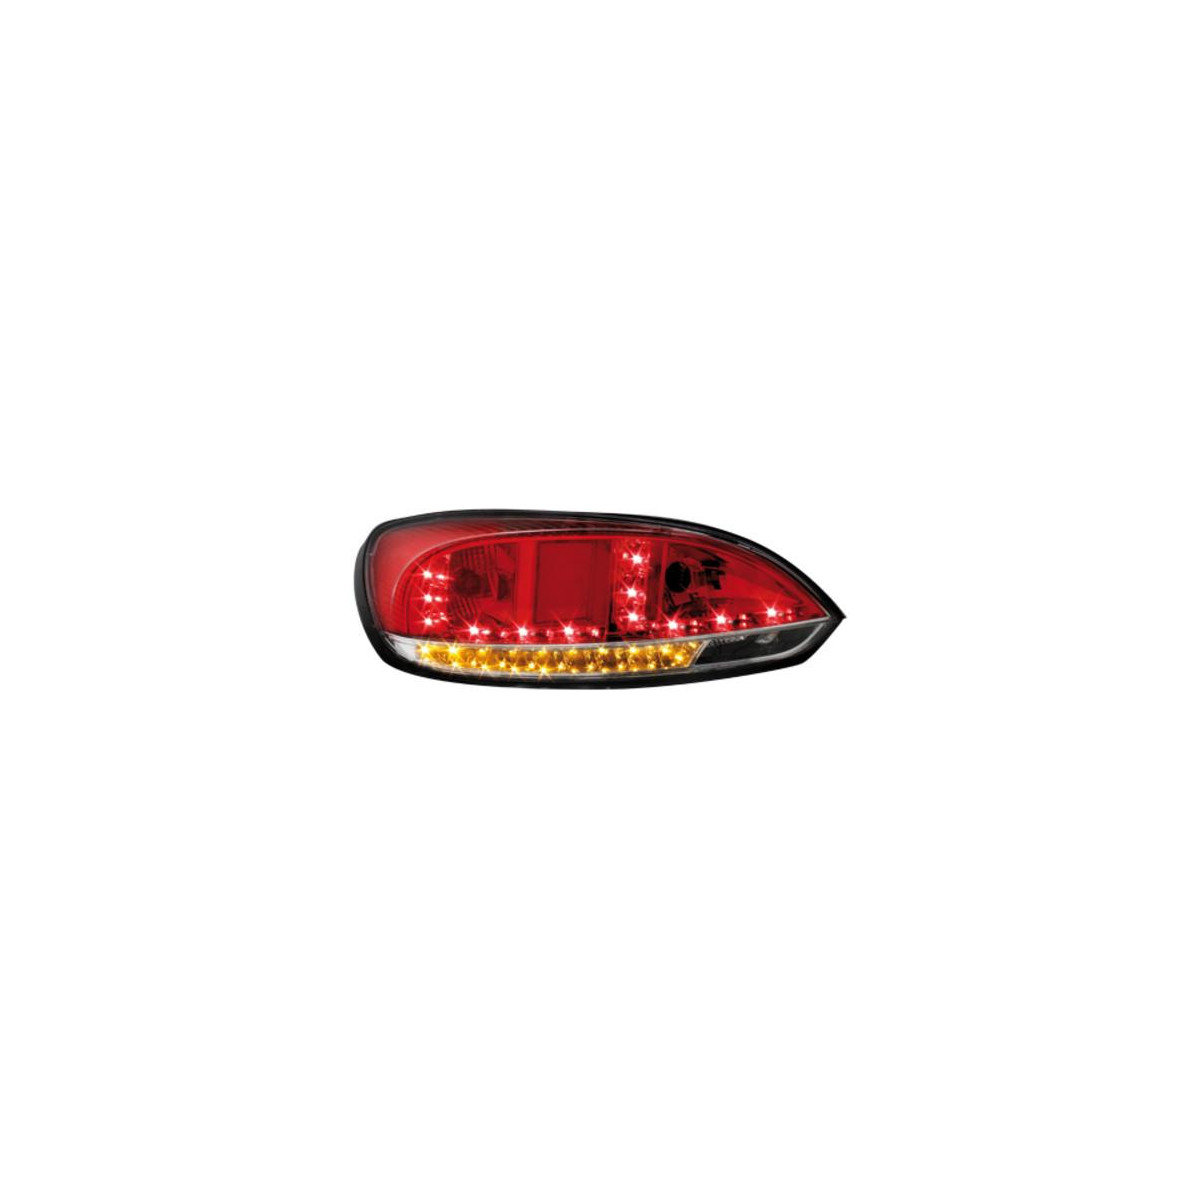 LAMPY TYLNE LED VW SCIROCCO 08- RED WHITE